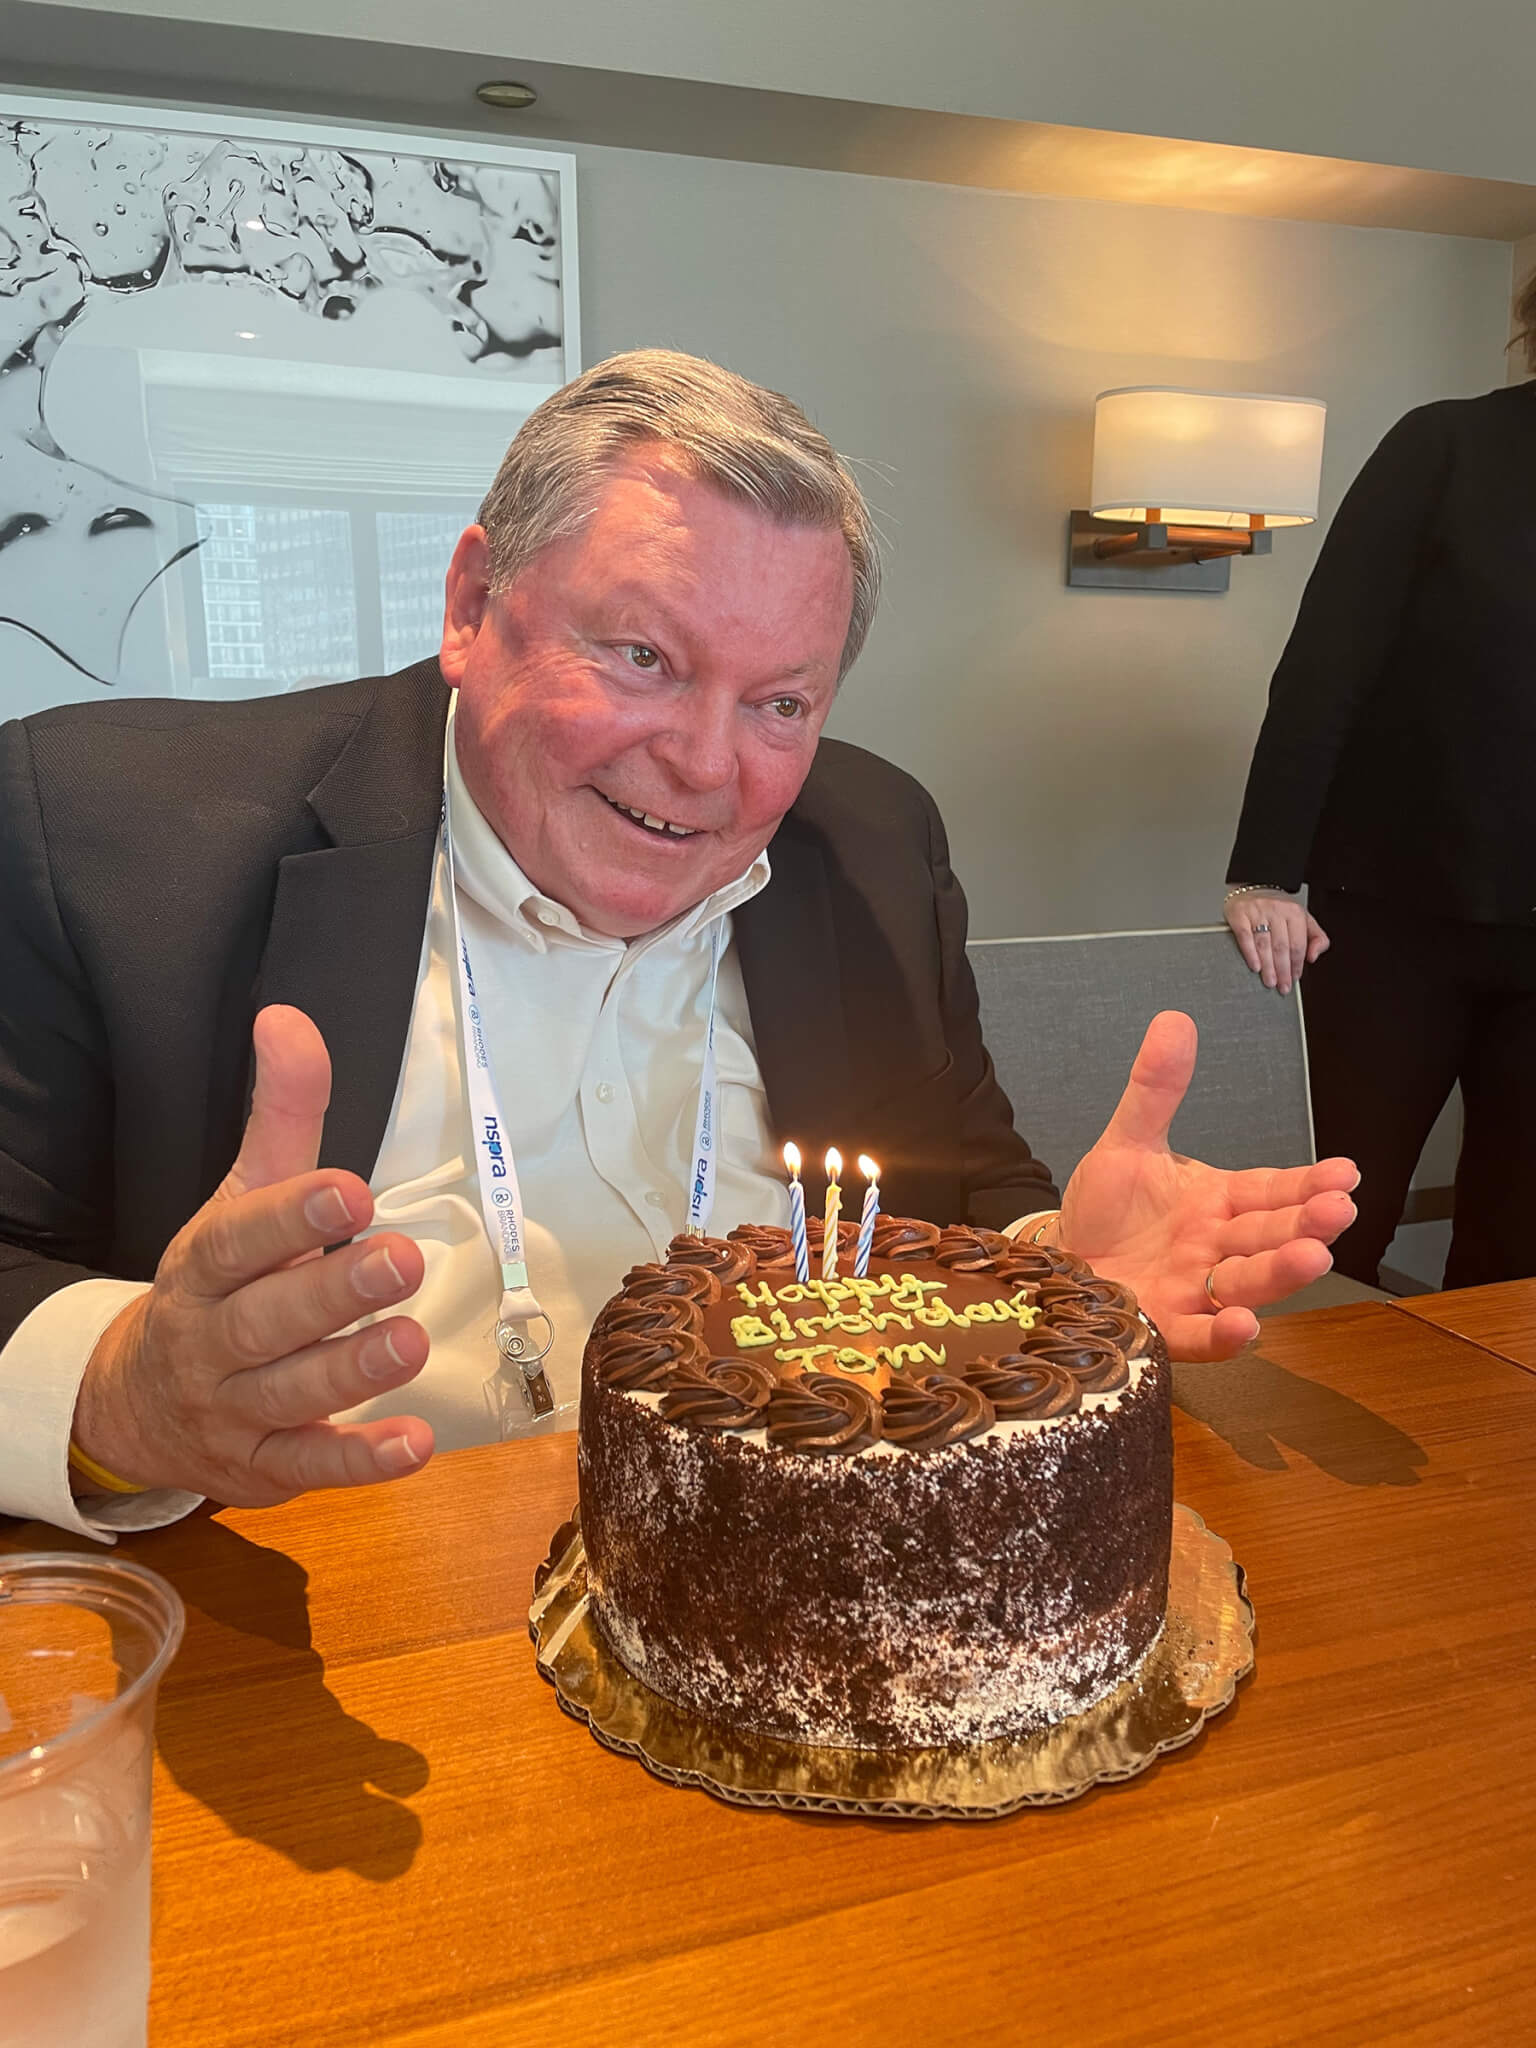 A man in business dress smiles and gestures while seated in front of a birthday cake with three lit candles, covered in chocolate frosting. The cake reads Happy Birthday Tom